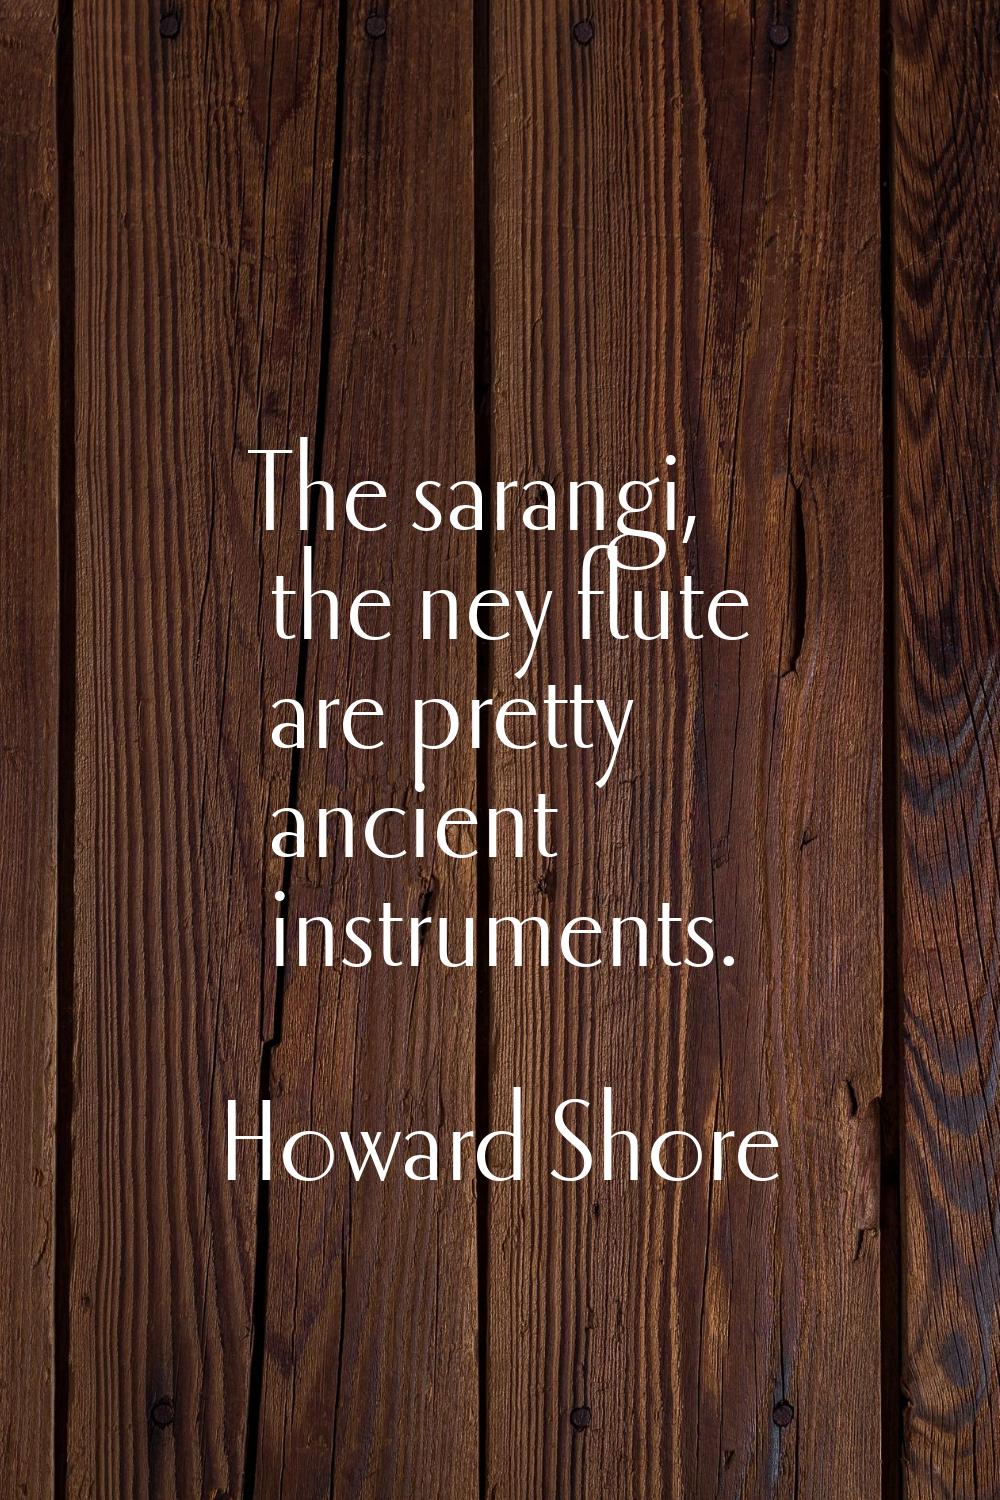 The sarangi, the ney flute are pretty ancient instruments.